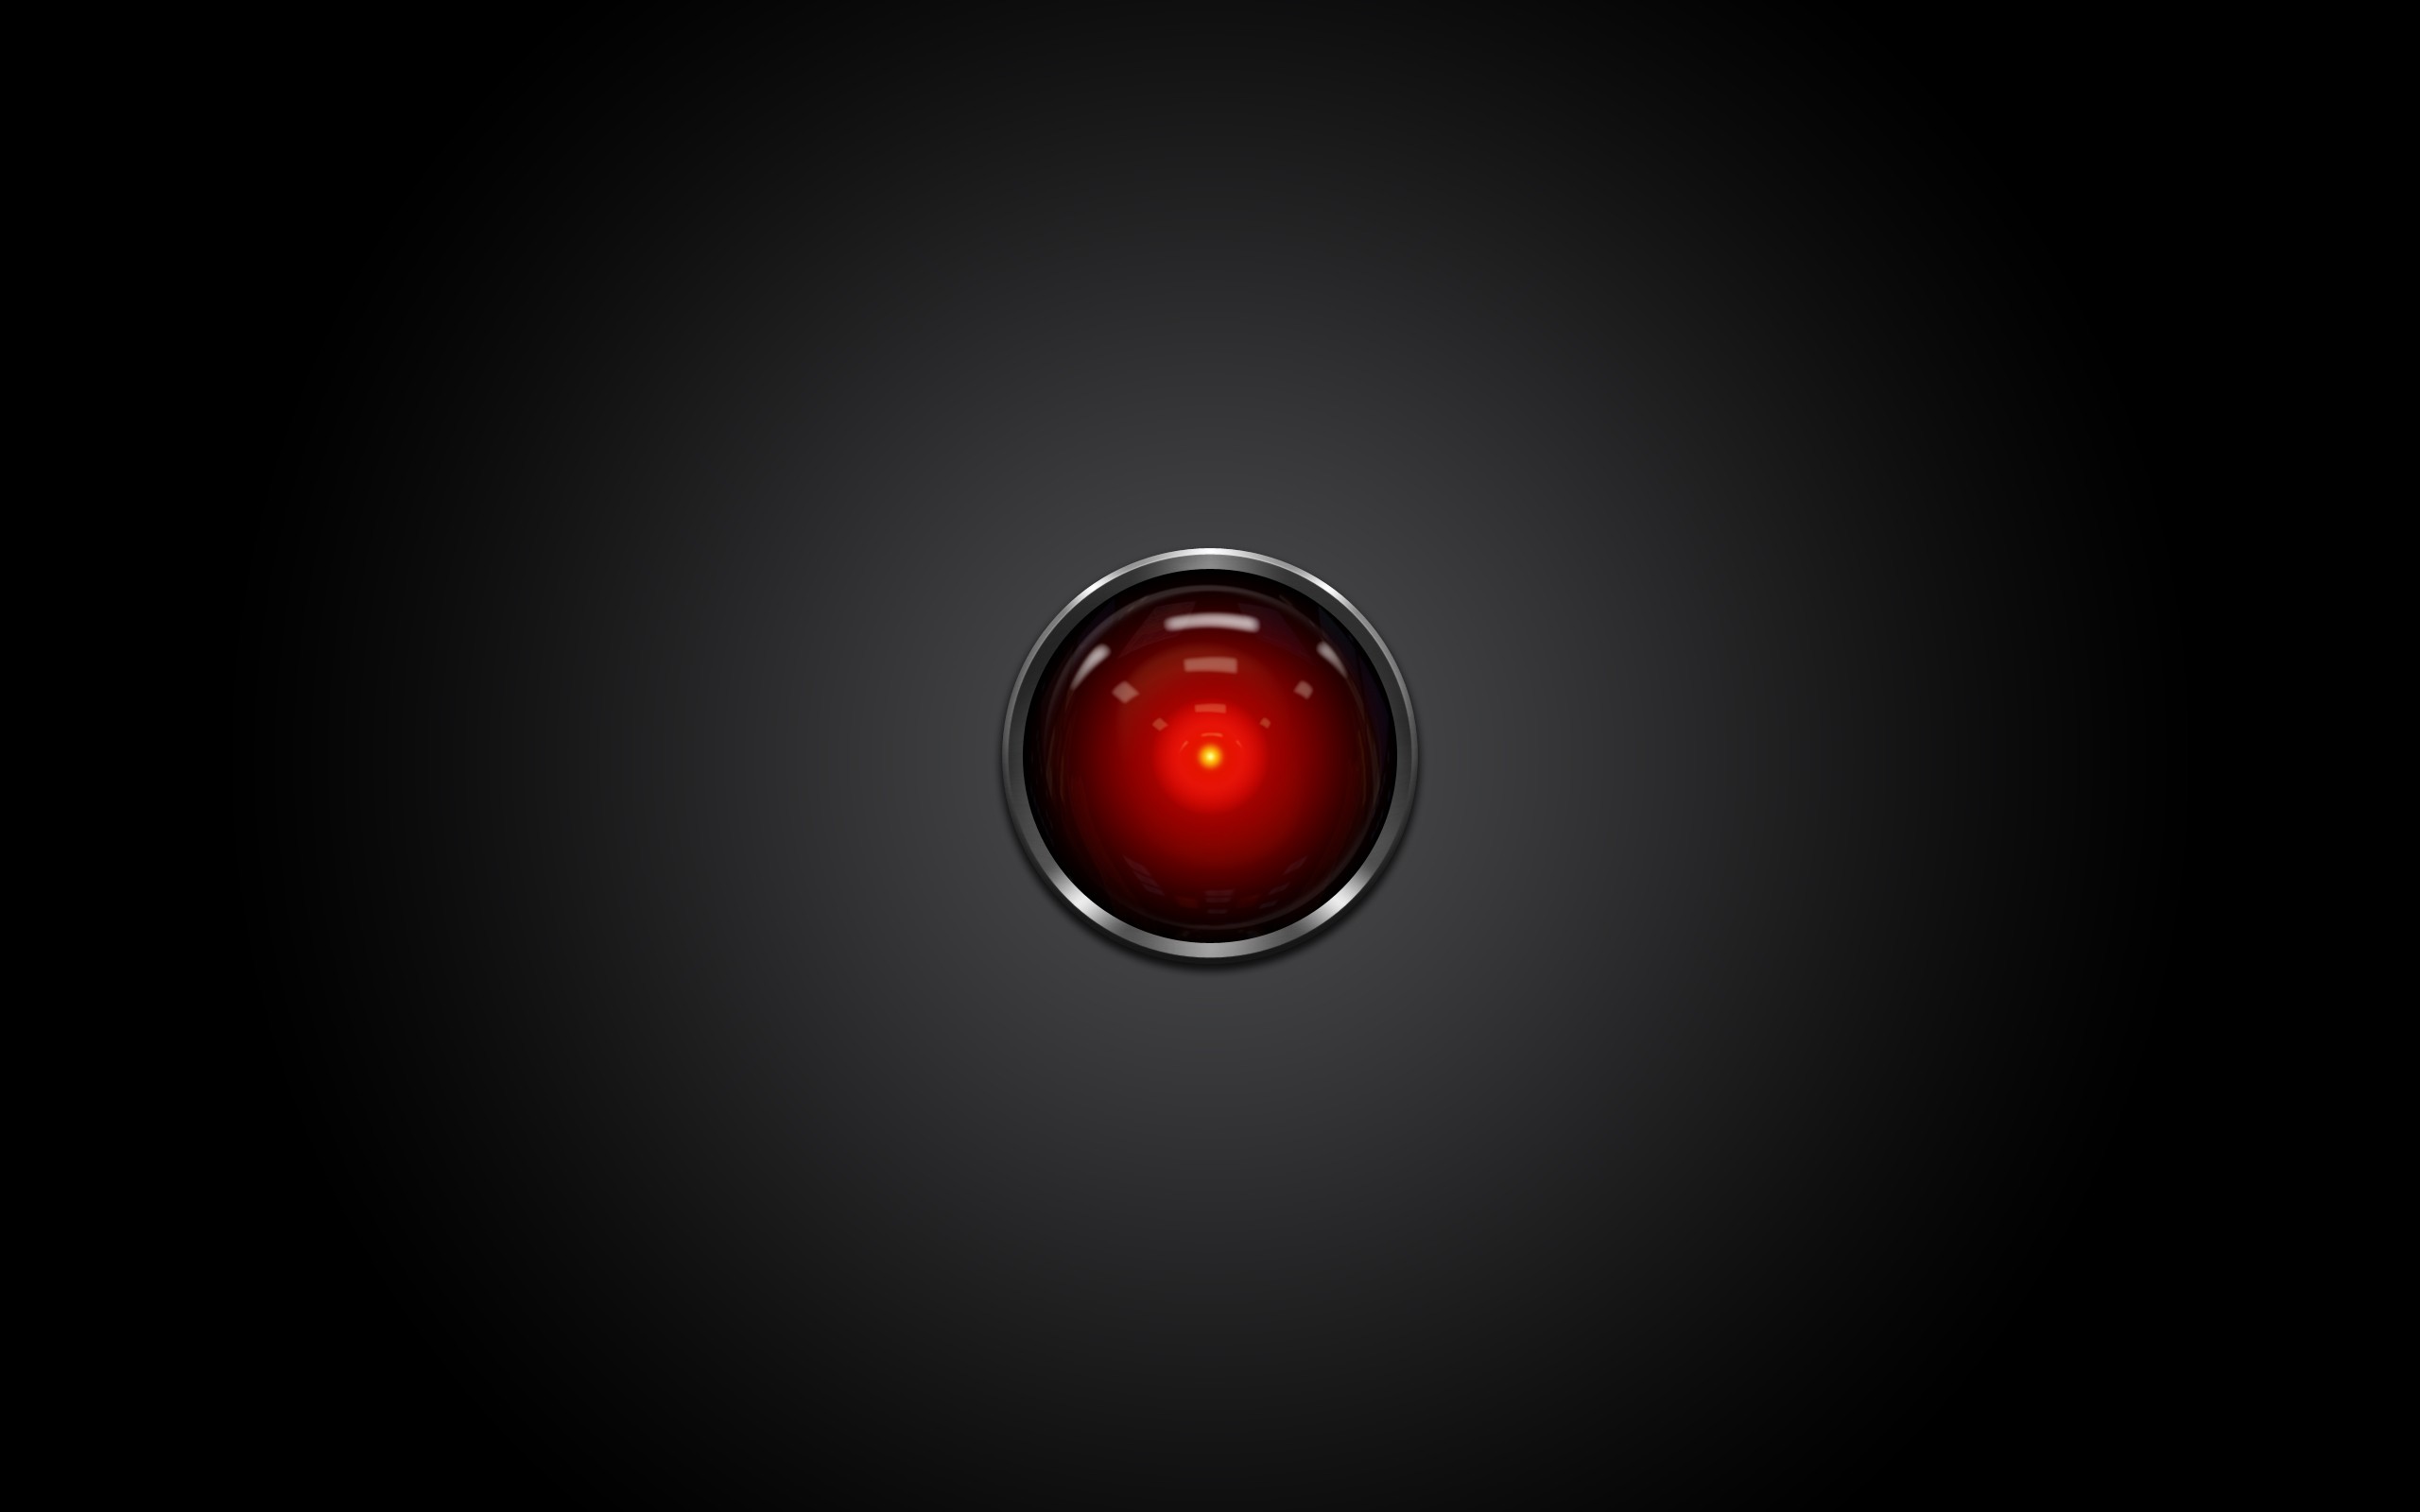 General 2560x1600 HAL 9000 movies computer science fiction 2001: A Space Odyssey